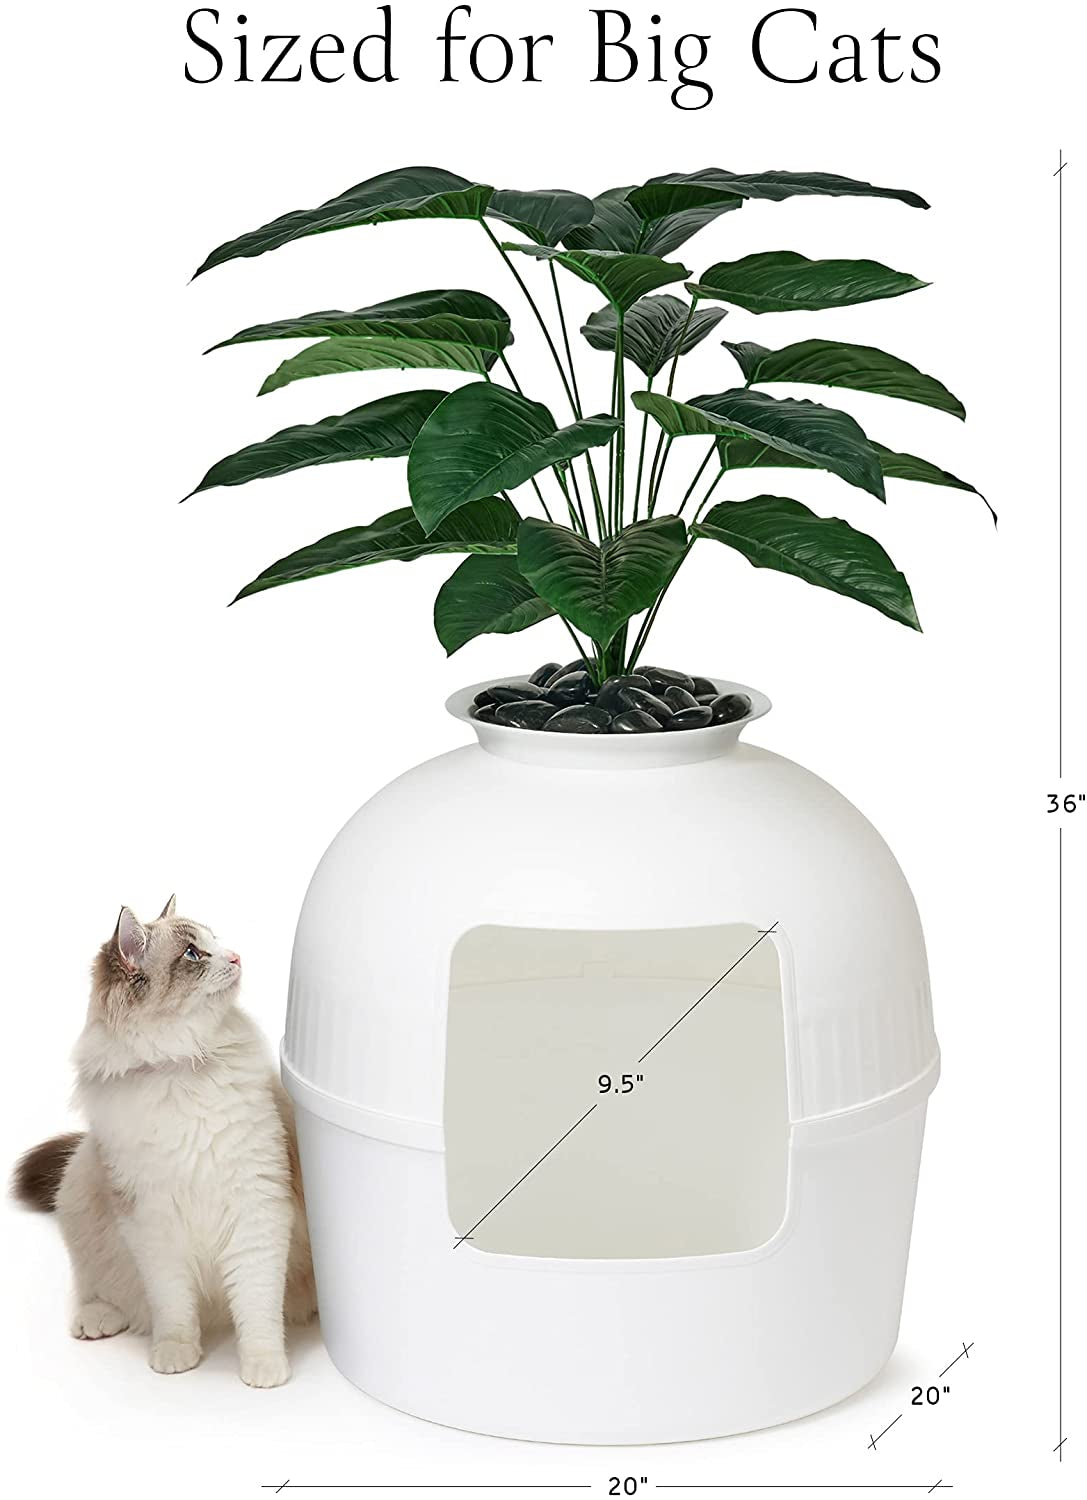 Secret Litter Box by MZDXJ - Hidden Litter Box Enclosure with Odor Control Carbon Filter, Faux Plant and Real Stones, Perfect for Large Cats Animals & Pet Supplies > Pet Supplies > Cat Supplies > Cat Furniture MZDXJ   